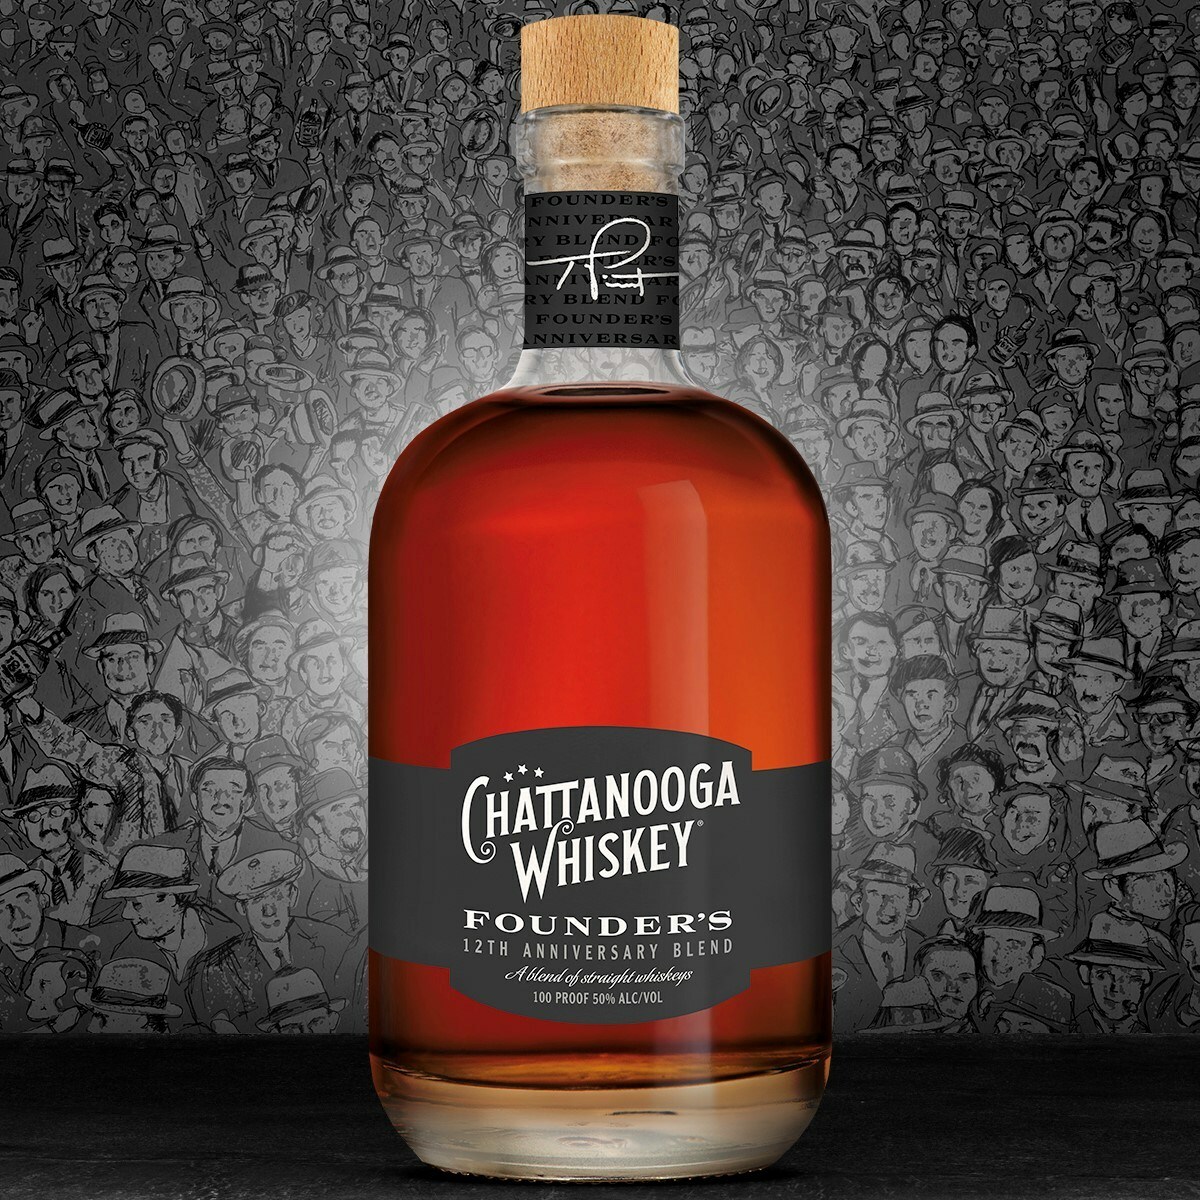 Chattanooga Whiskey Releases Founder's 12th Anniversary Blend luxurylifestyle.com/headlines/chat… #whiskey #whisky #whiskies #spirits